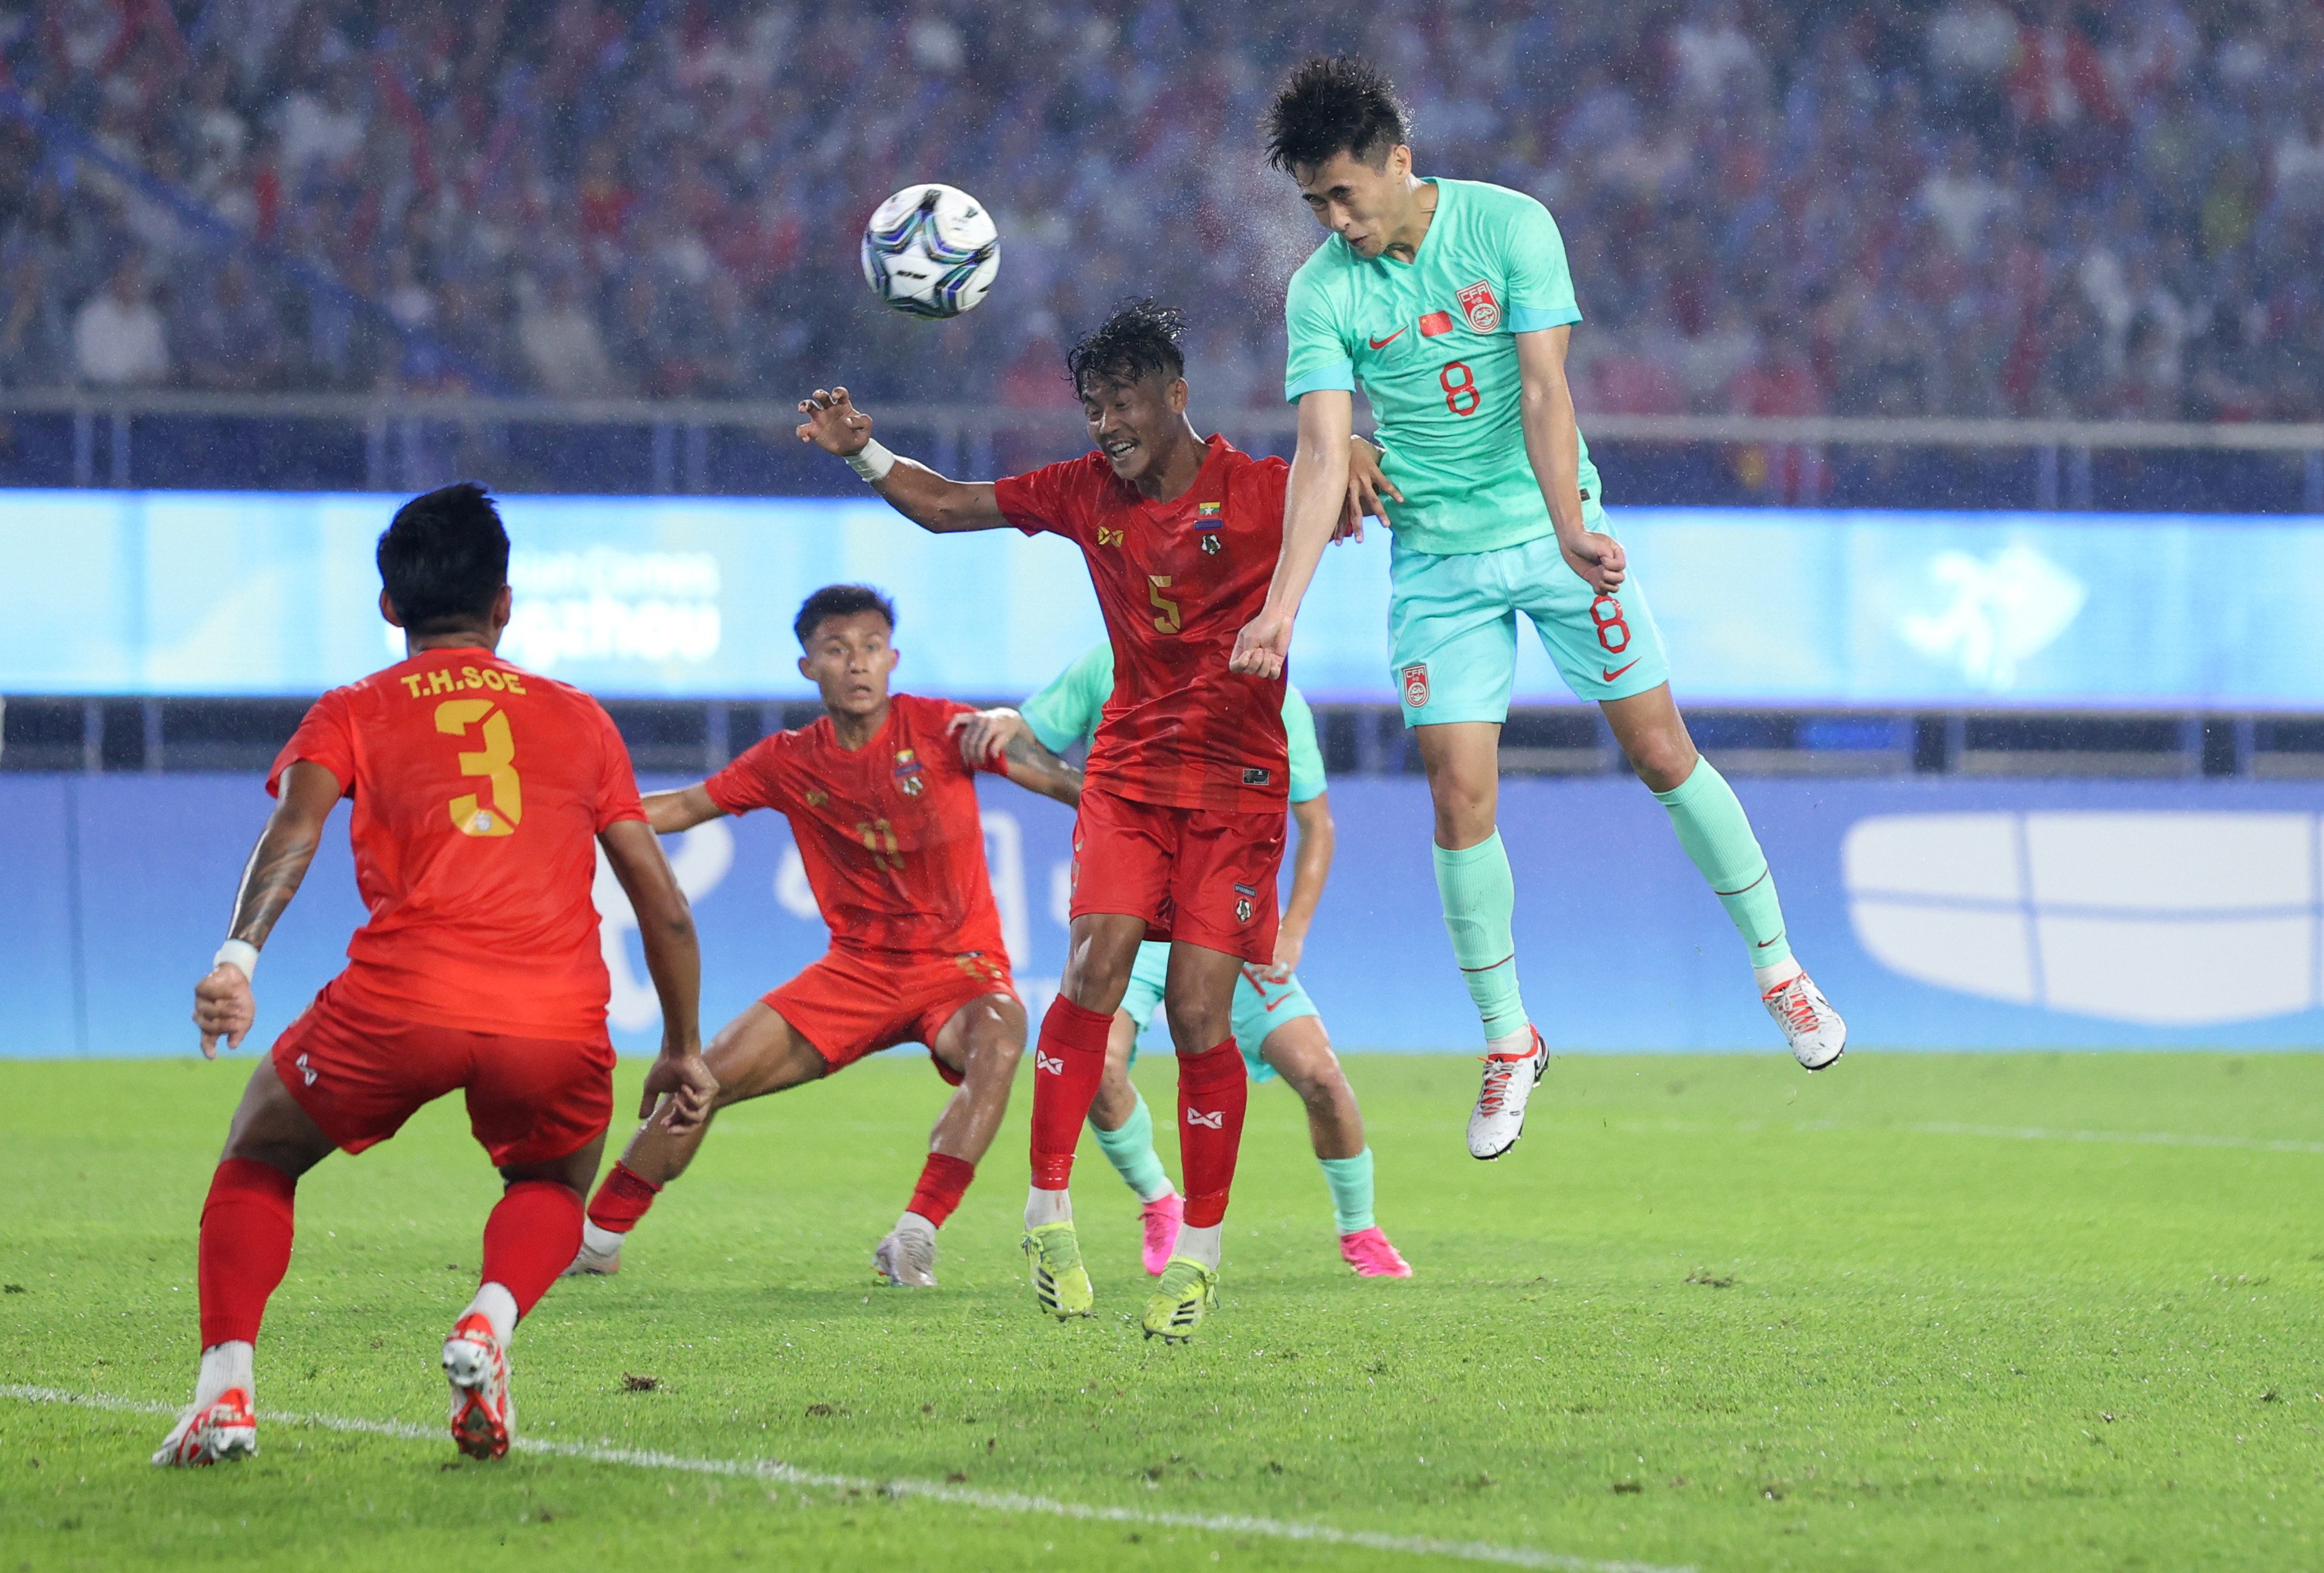 China’s Dai Wai-tsun powers a header towards the goal to score his side’s fourth against Myanmar. Photo: Xinhua